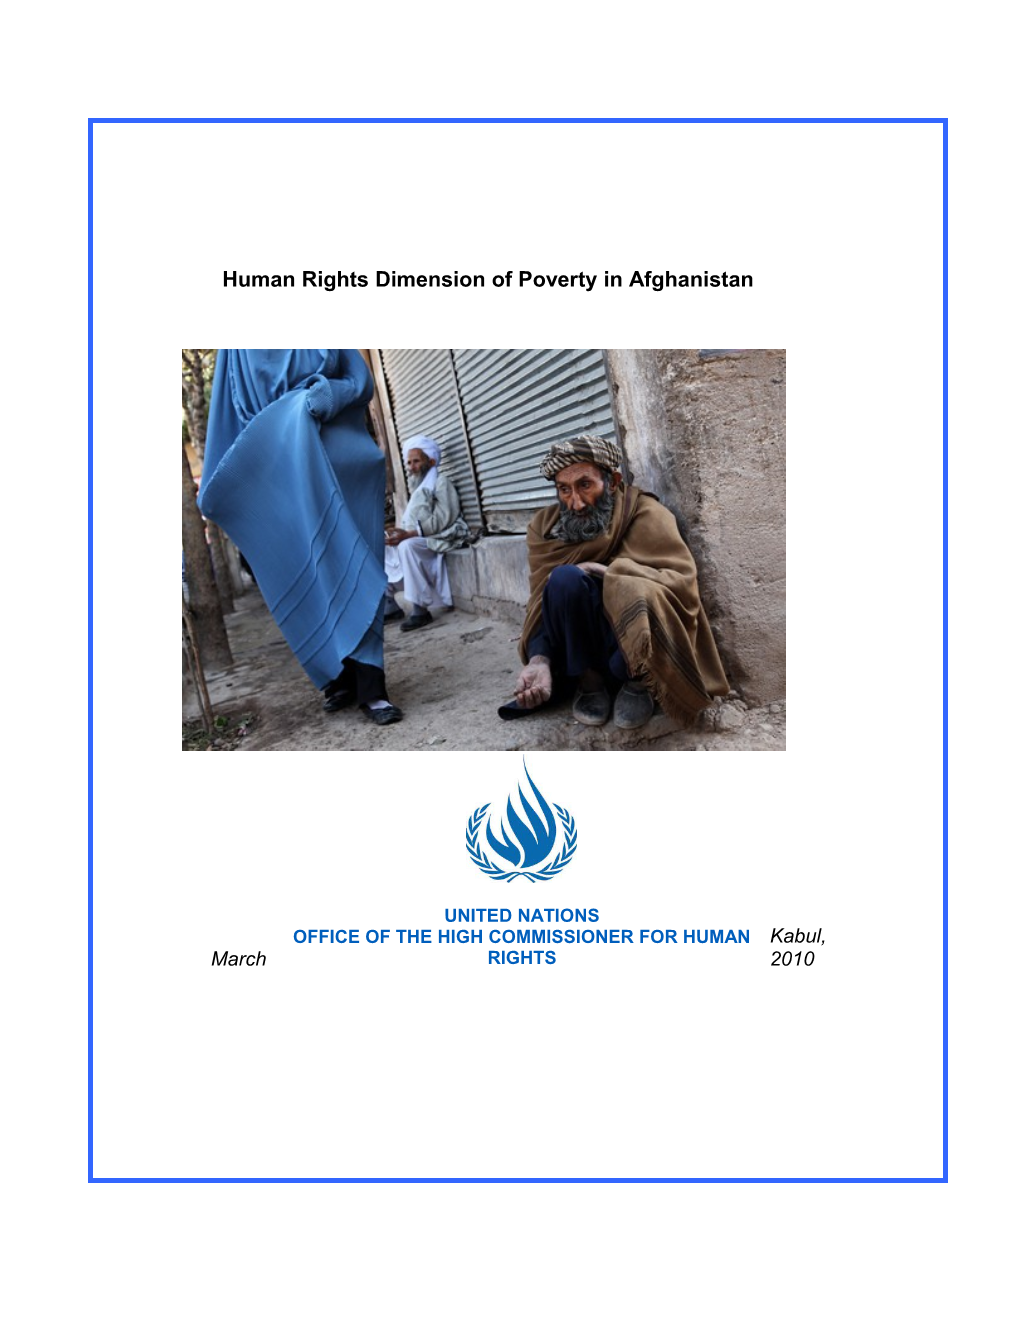 Human Rights Dimension of Poverty in Afghanistan